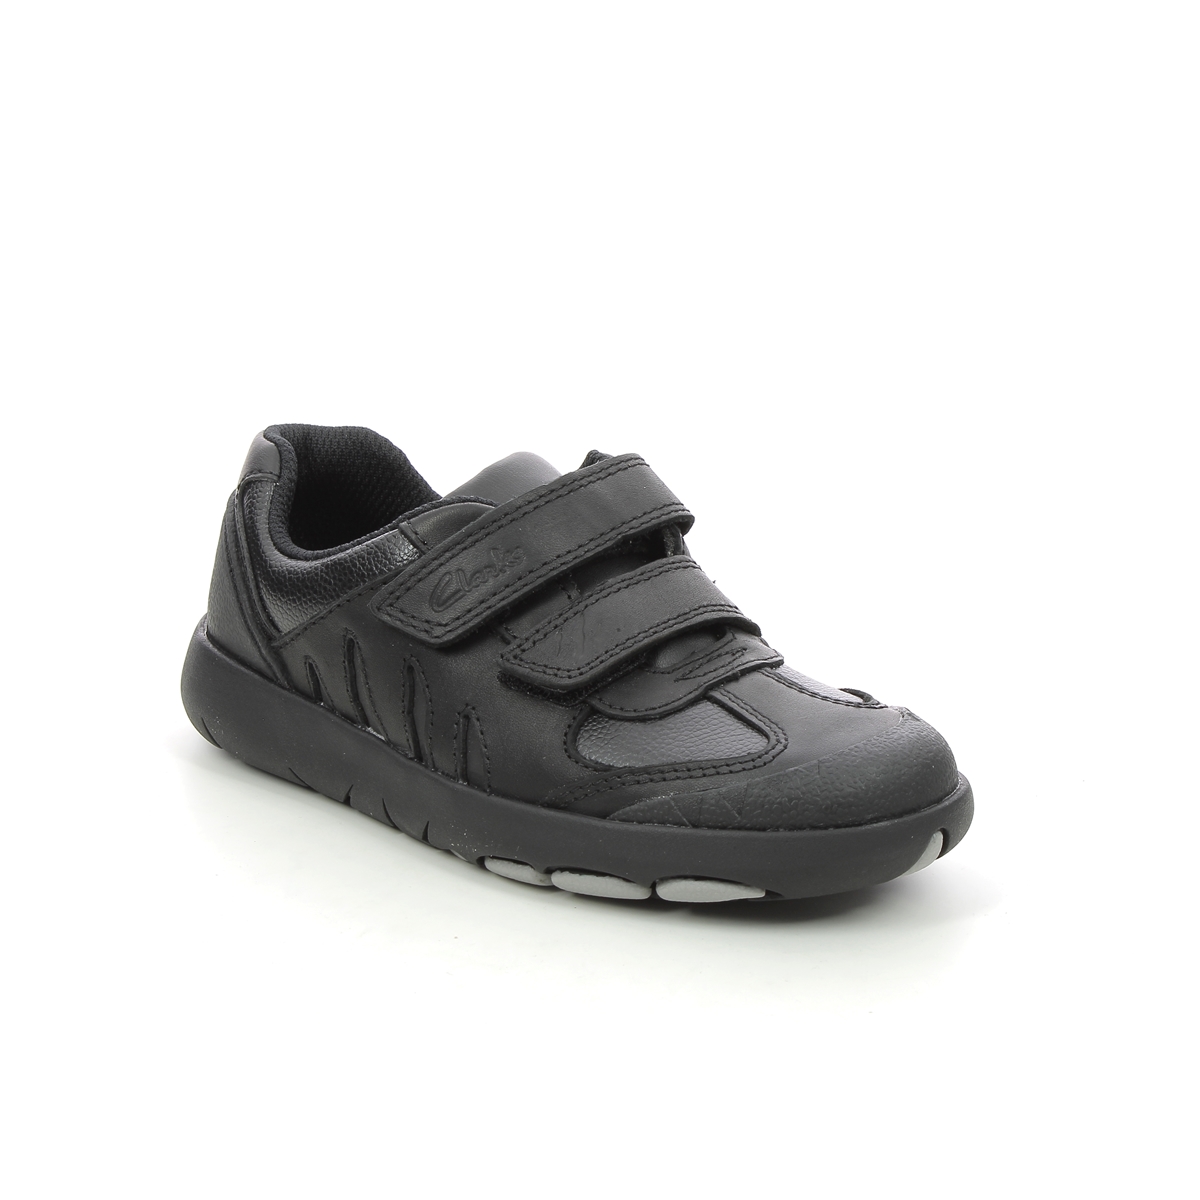 Clarks Rex Stride K Black Leather Kids Boys Shoes 626987G In Size 1 In Plain Black Leather G Width Fitting For School For kids